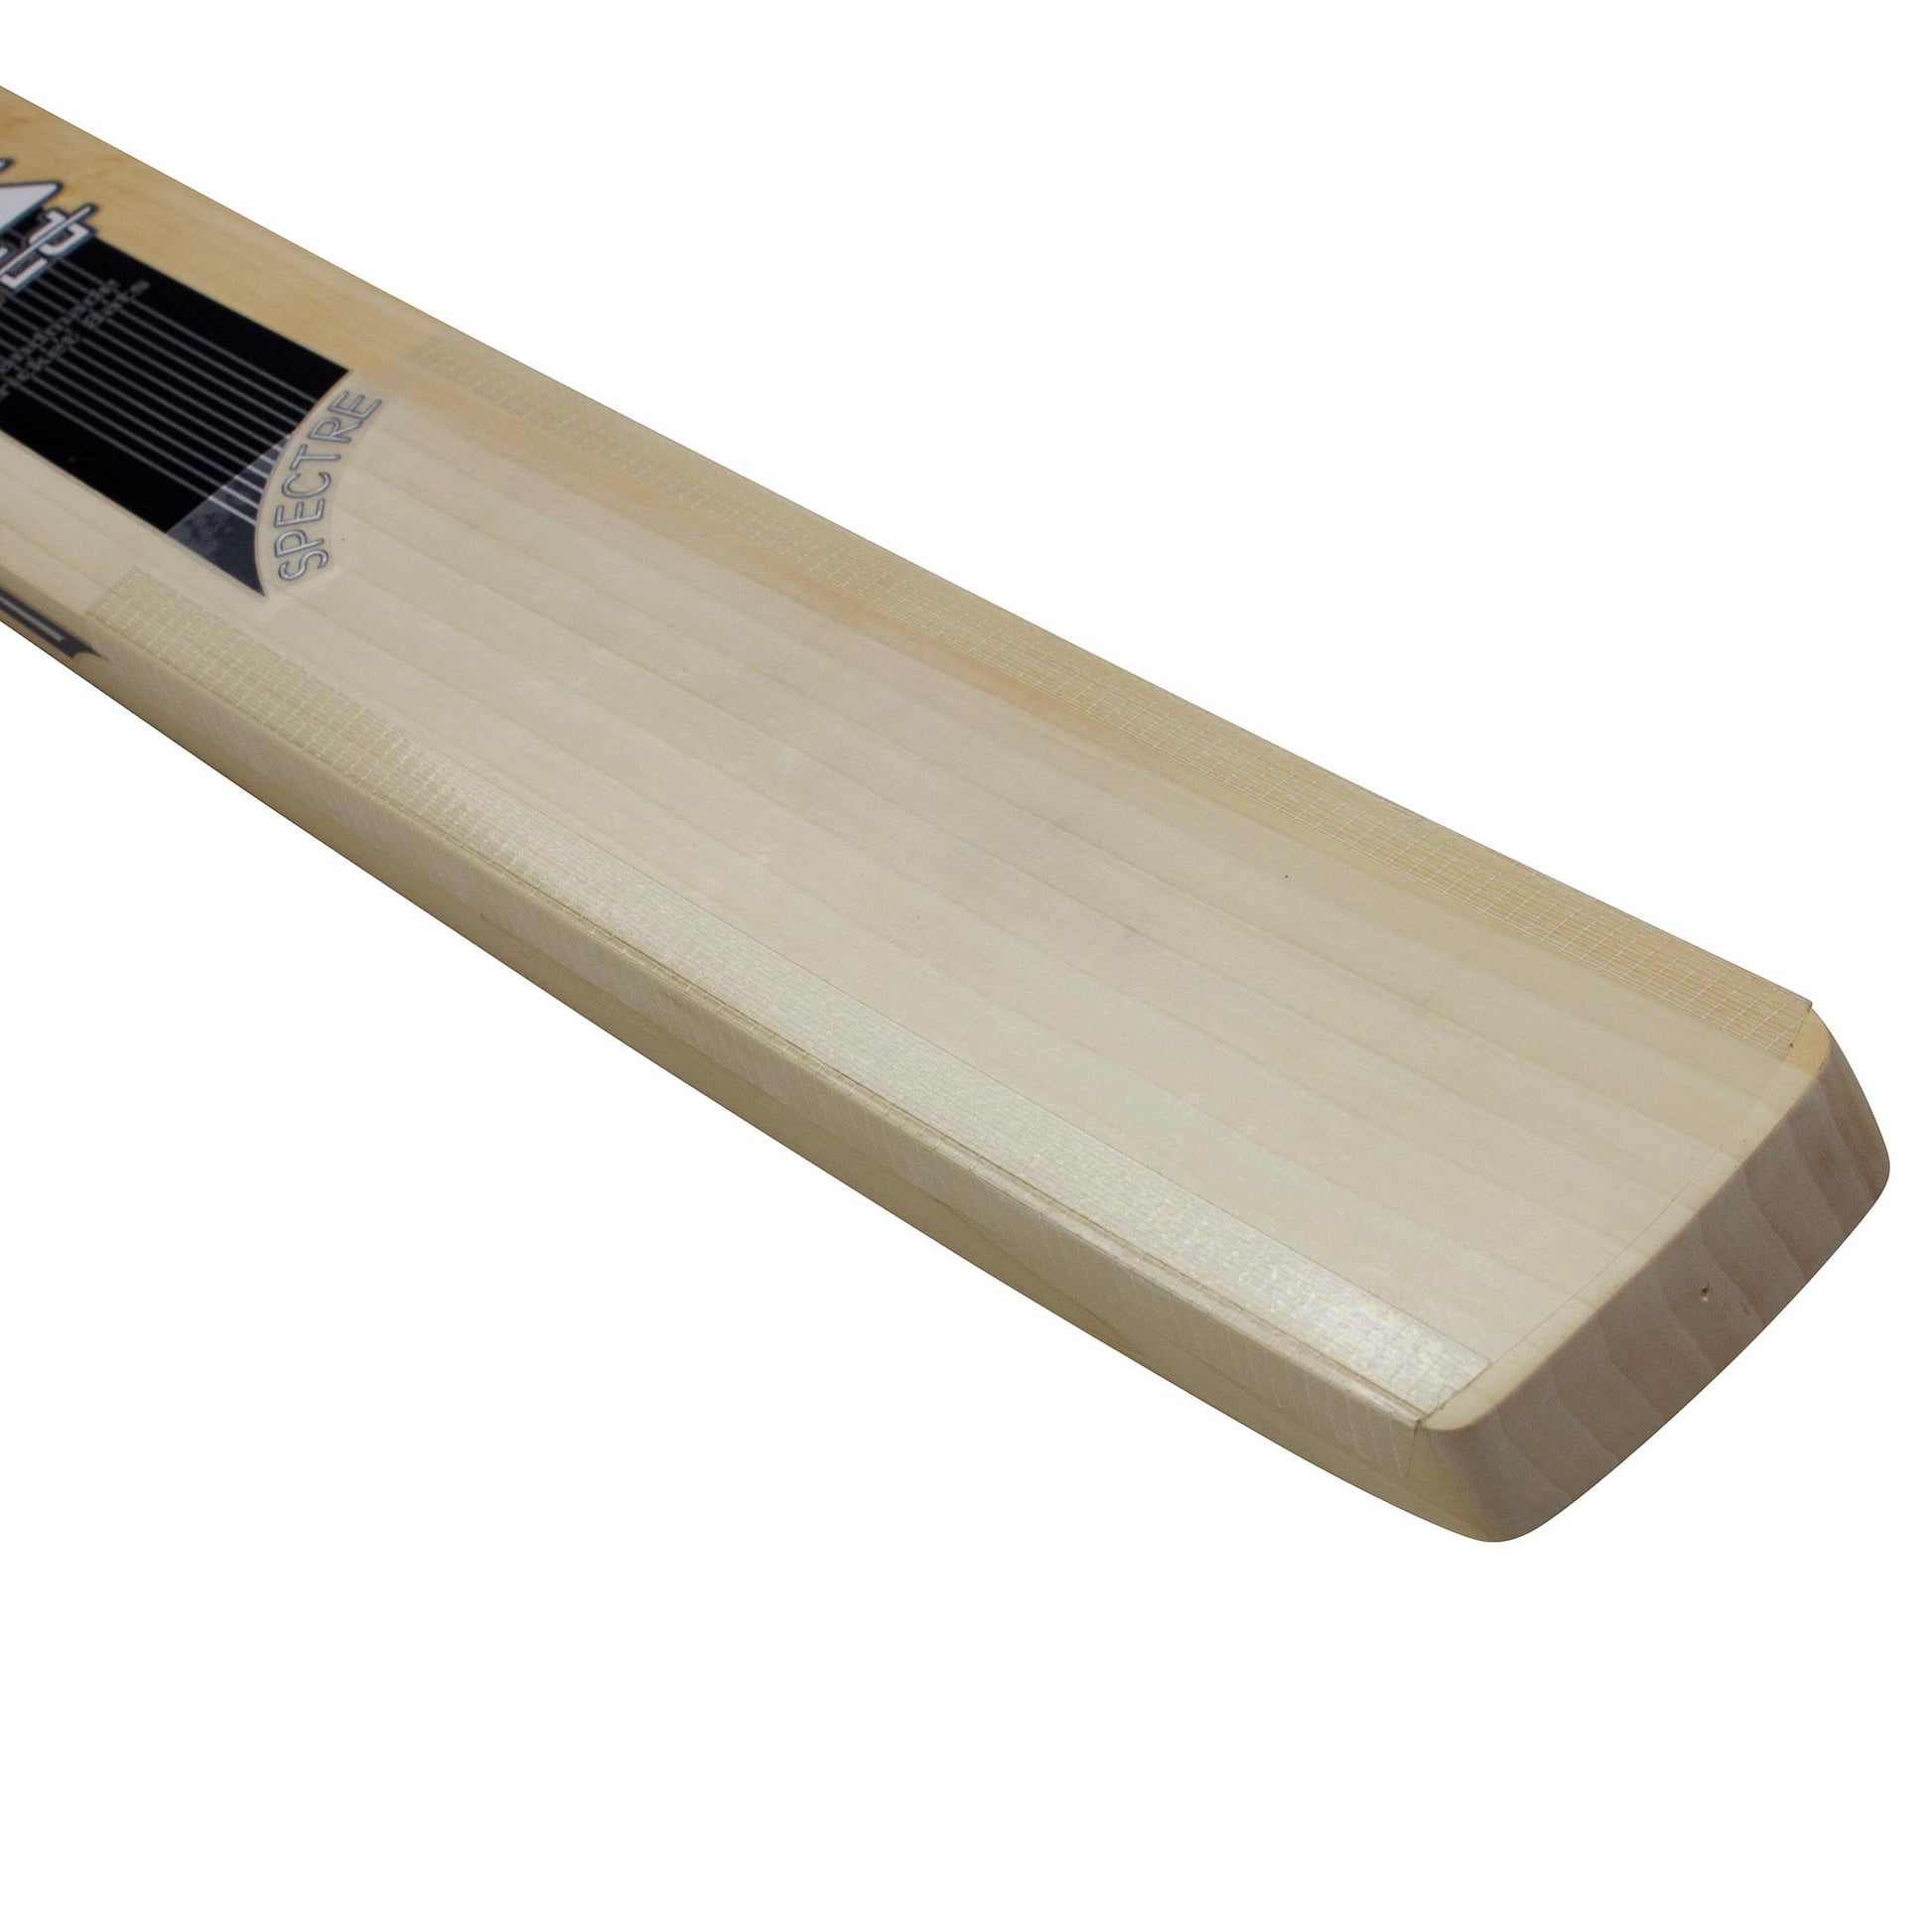 Paul Aldred Cricket Spectre Harrow Handmade Handcrafted English Willow Cricket Bat Hove East Sussex